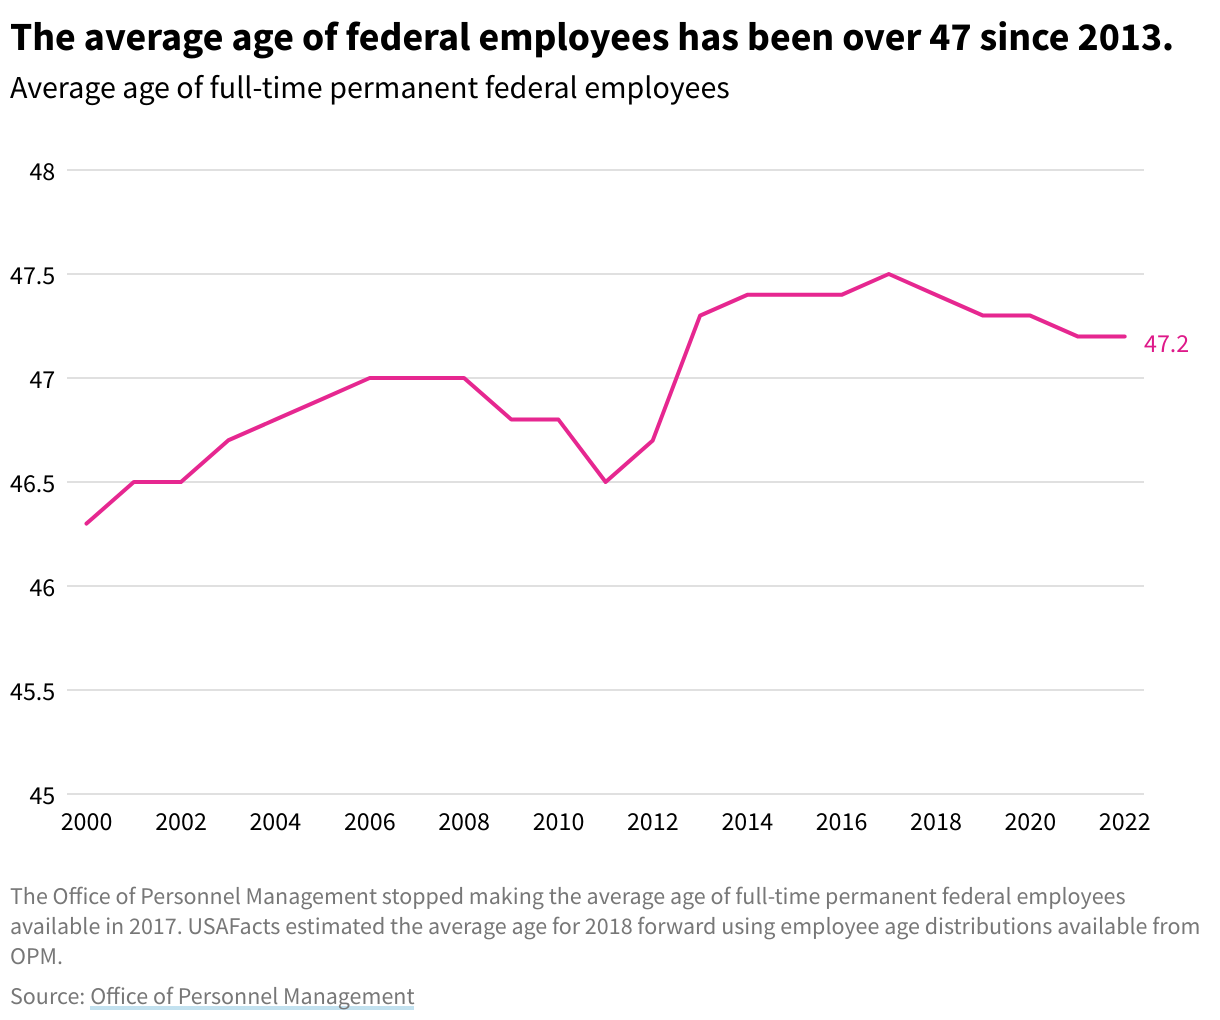 Line chart showing the average age of federal employees from 2000 to 2017.